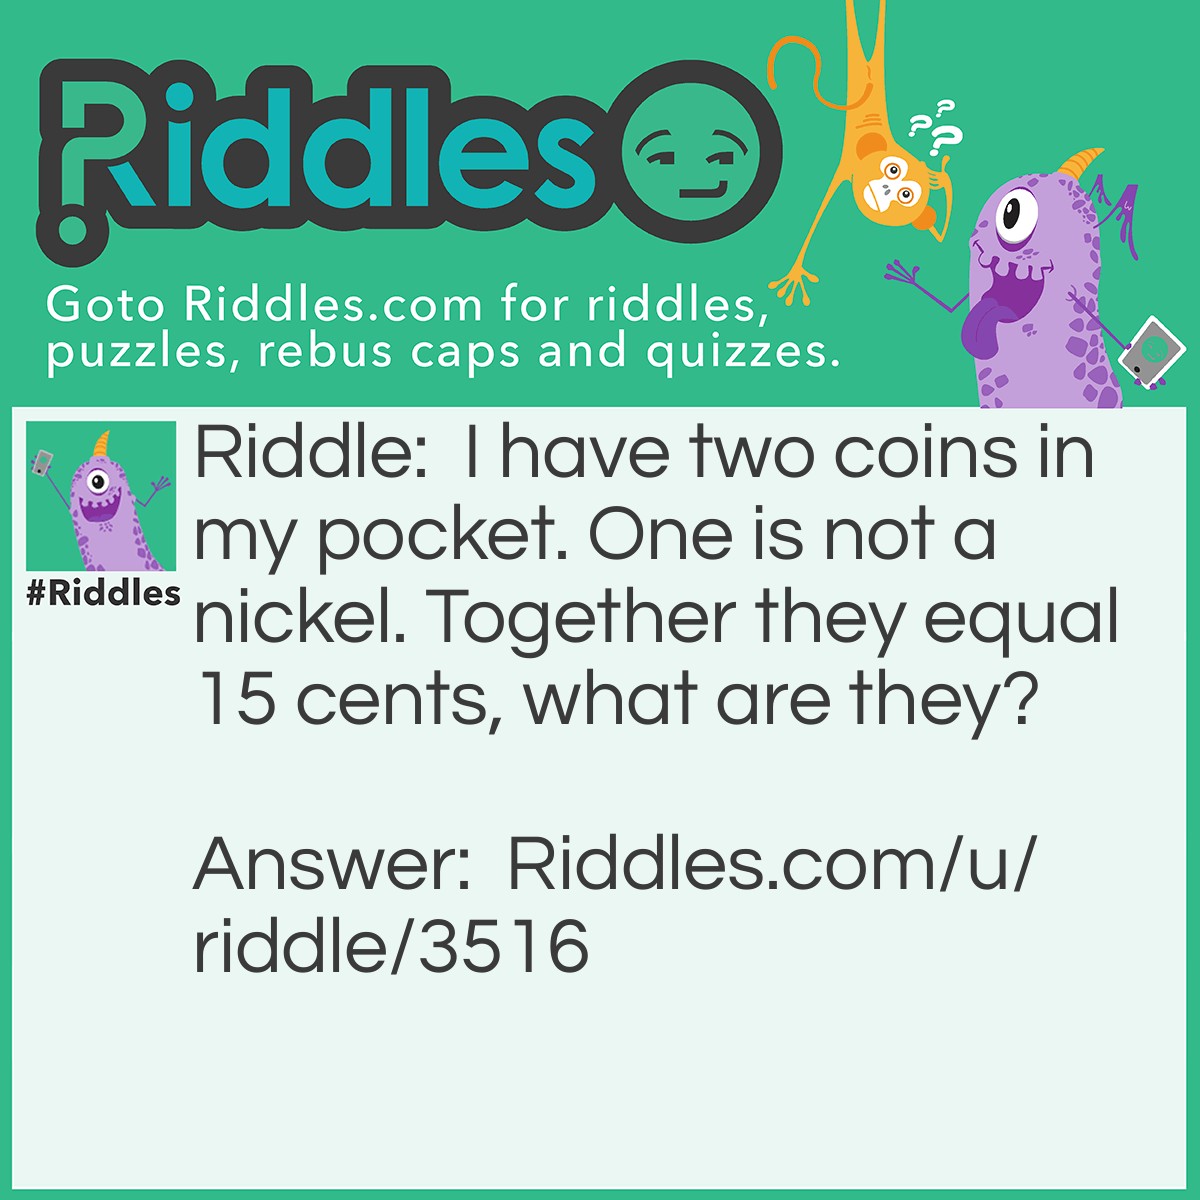 Riddle: I have two coins in my pocket. One is not a nickel. Together they equal 15 cents, what are they? Answer: A nickel and a dime. One can't be, the other one can.